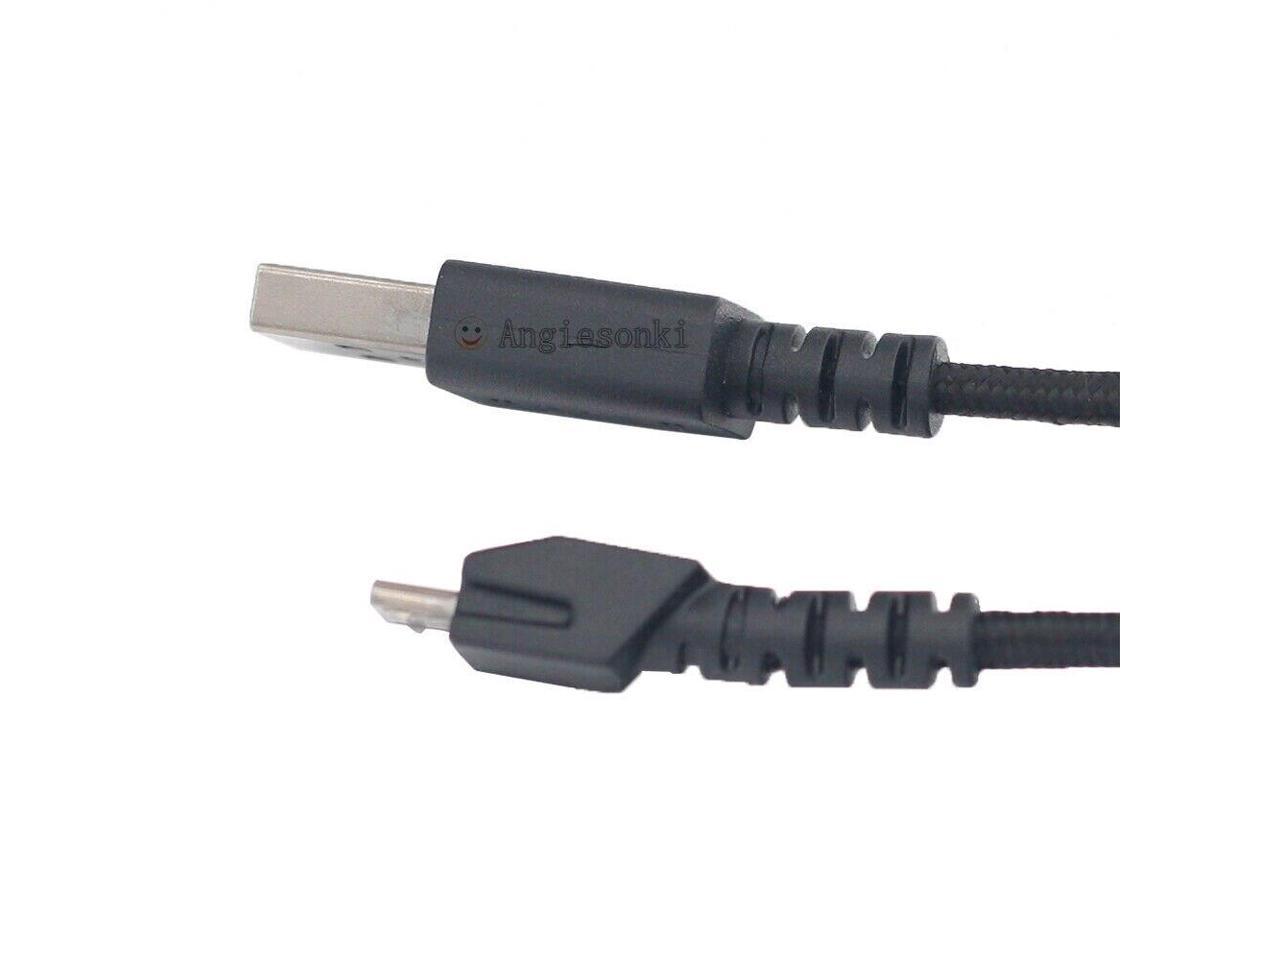 Micro USB wire data line charging cable for Razer Mamba Wireless Mouse